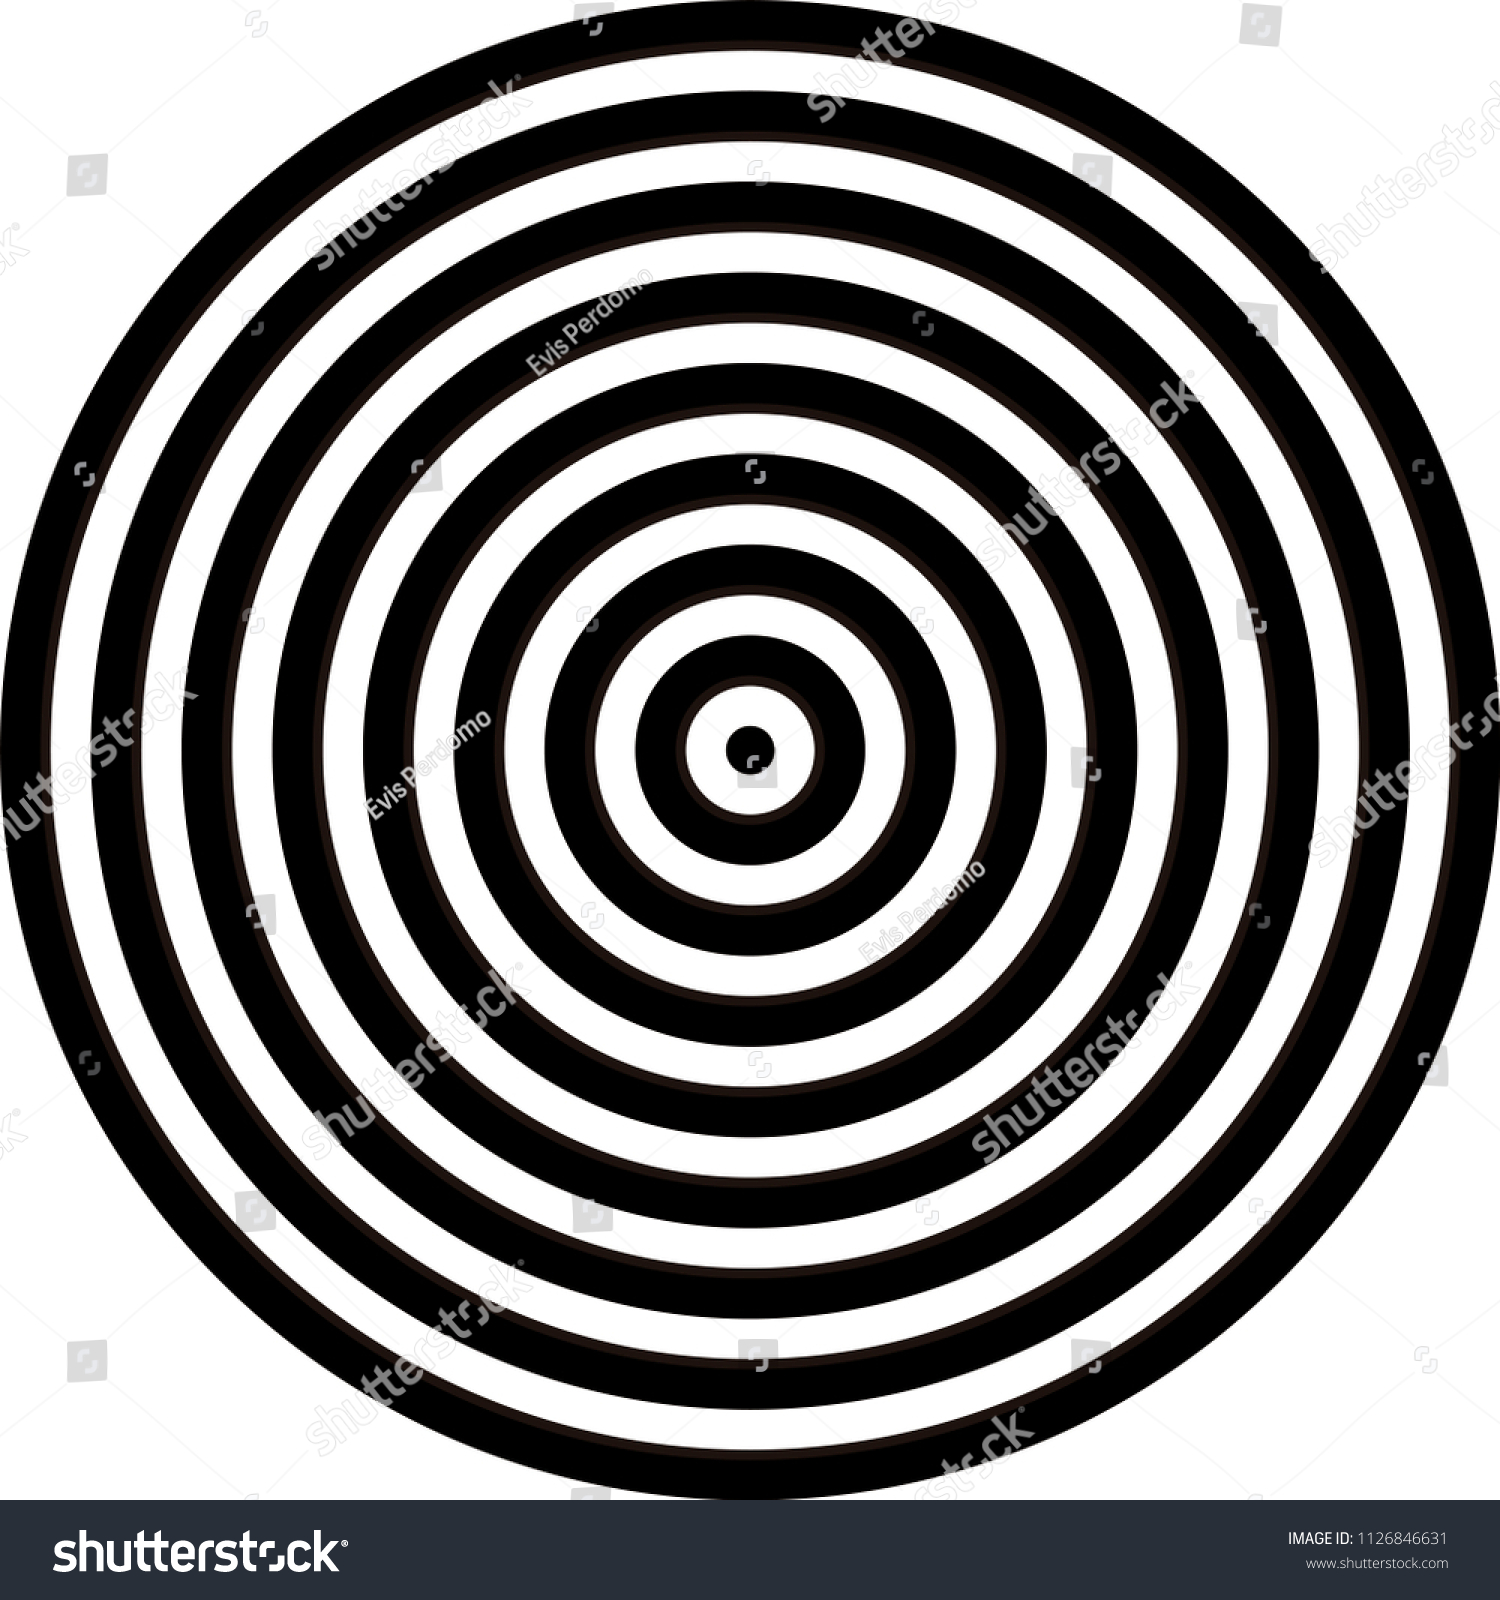 Concentric circles, concentric rings. Abstract - Royalty Free Stock ...